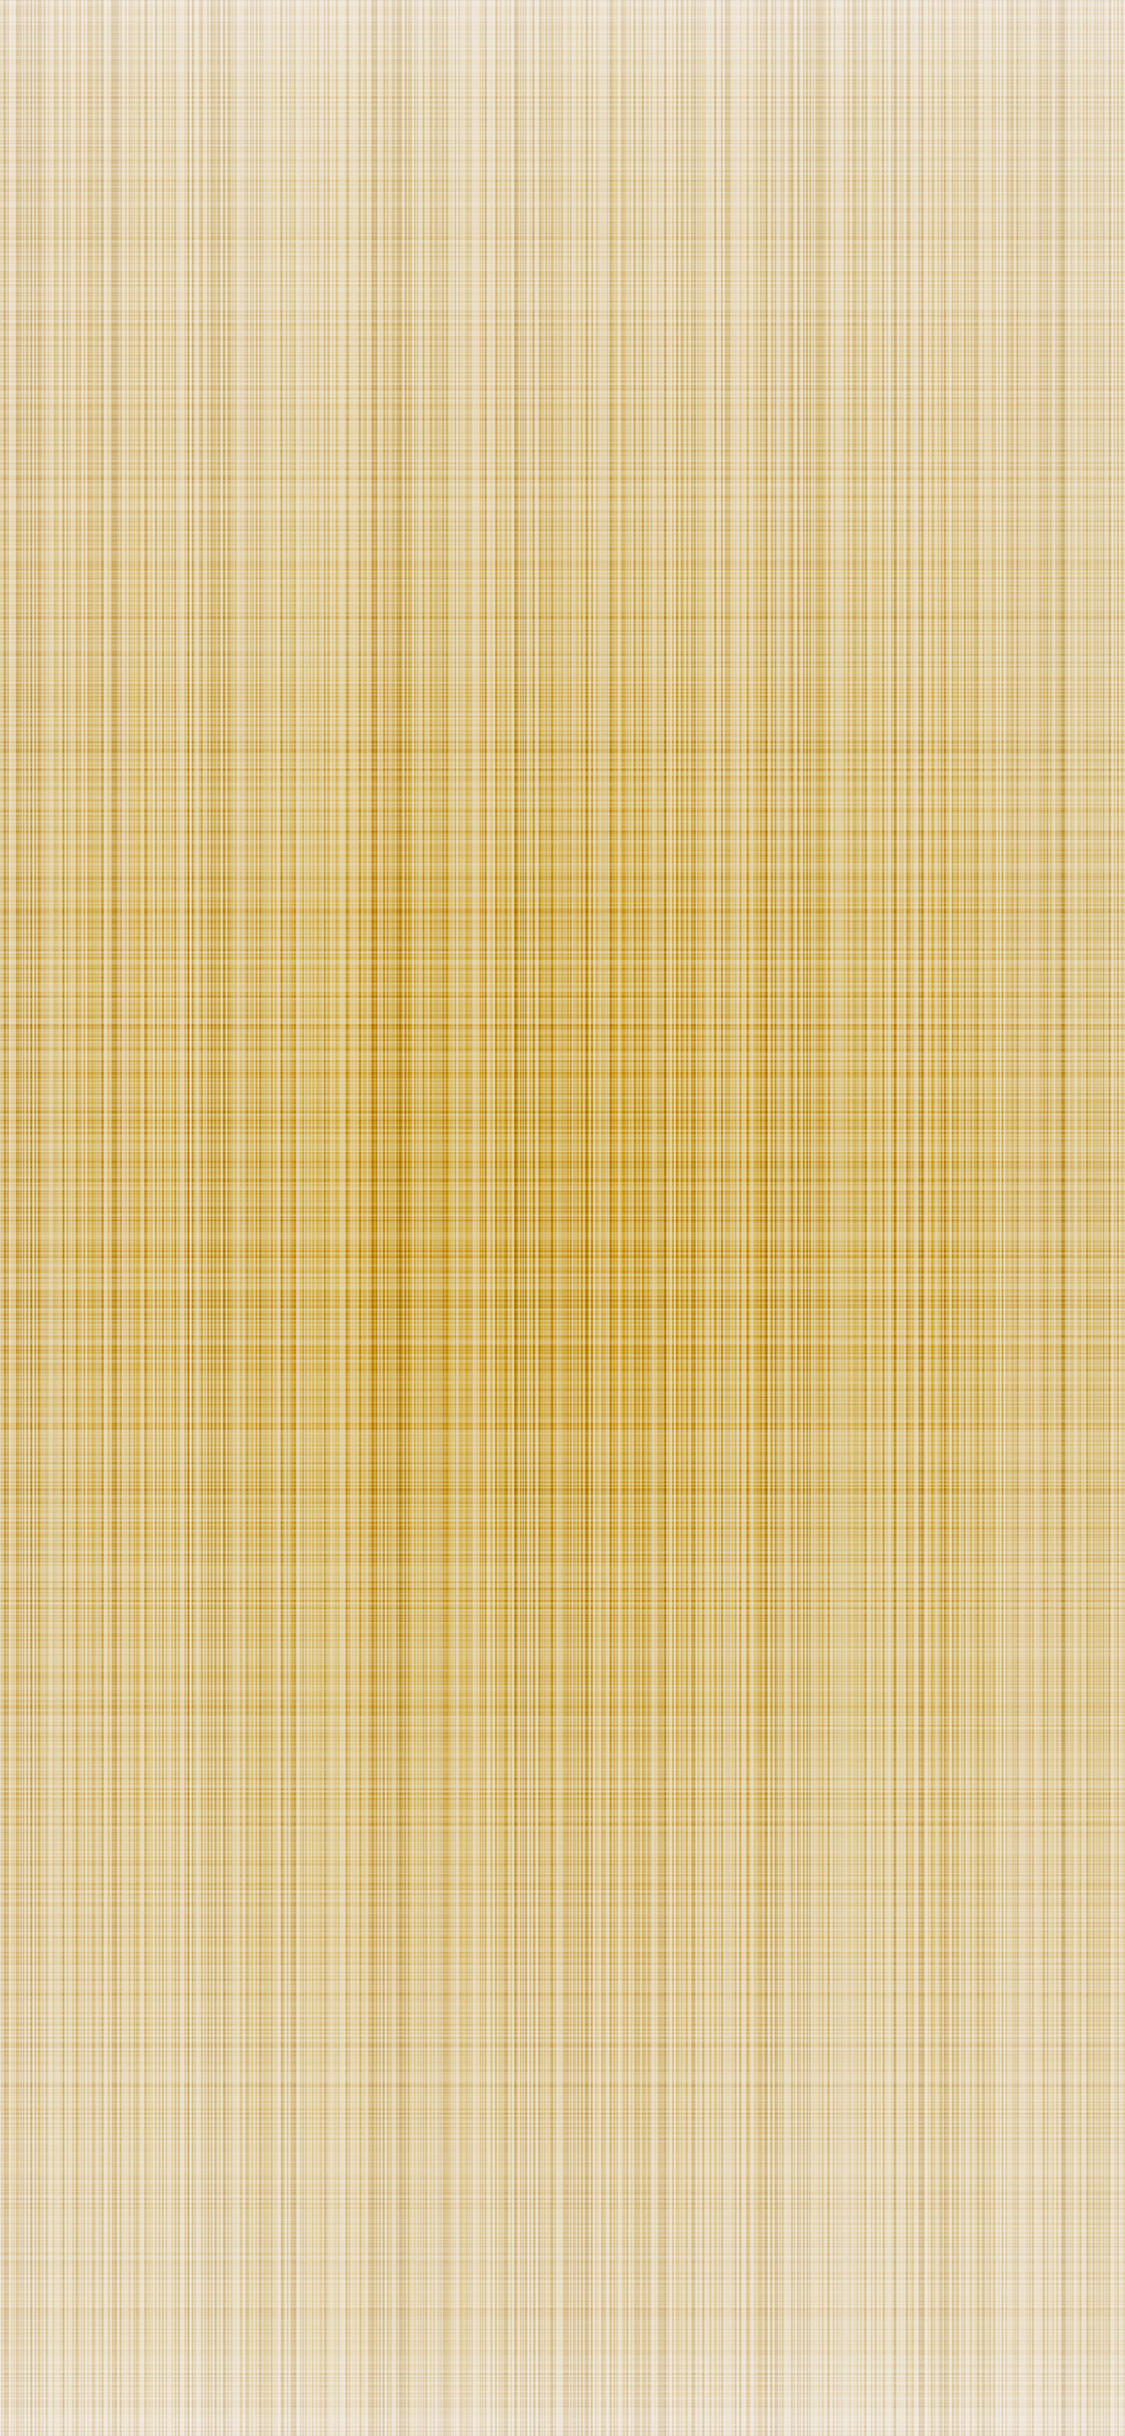 1125x2436 iPhoneXpapers.com | iPhone X wallpaper | vr84-linen-gold-white-abstract- pattern